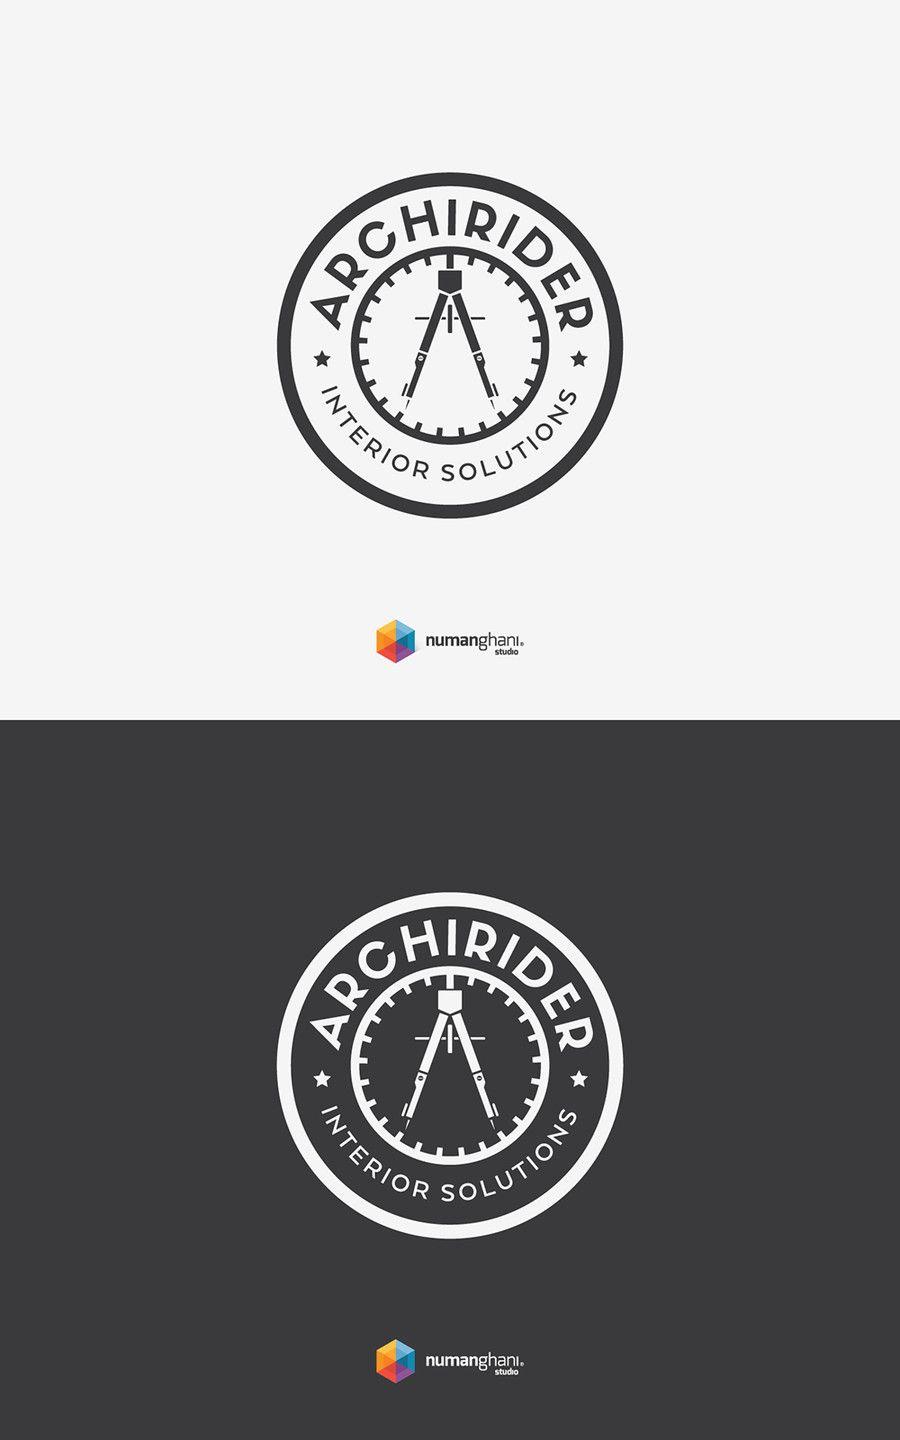 Round Company Logo - Entry by muhammadnuman for Round logo for Architectural company